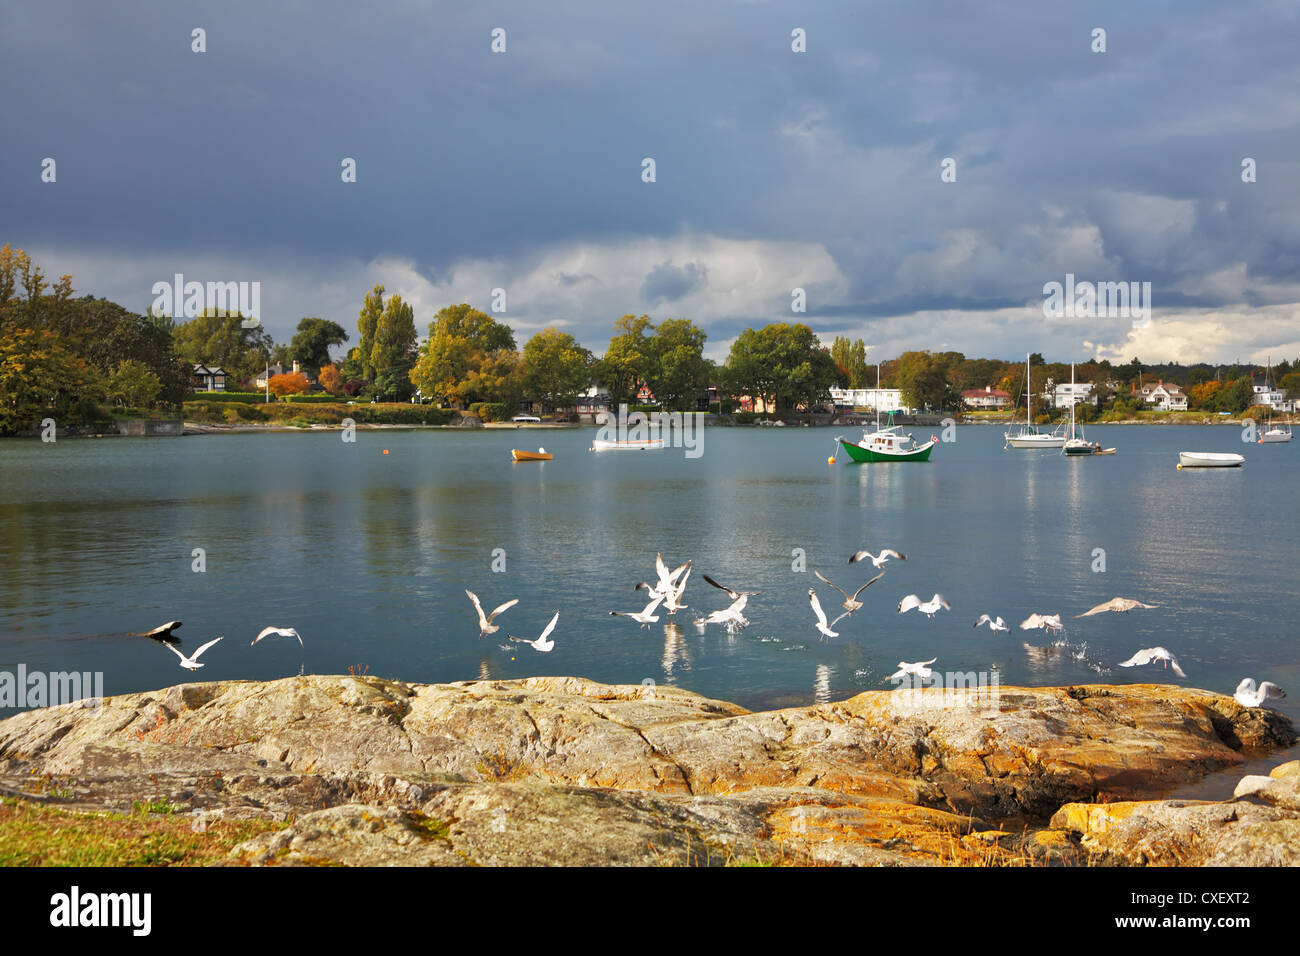 Seagulls fly above water of passage Stock Photo